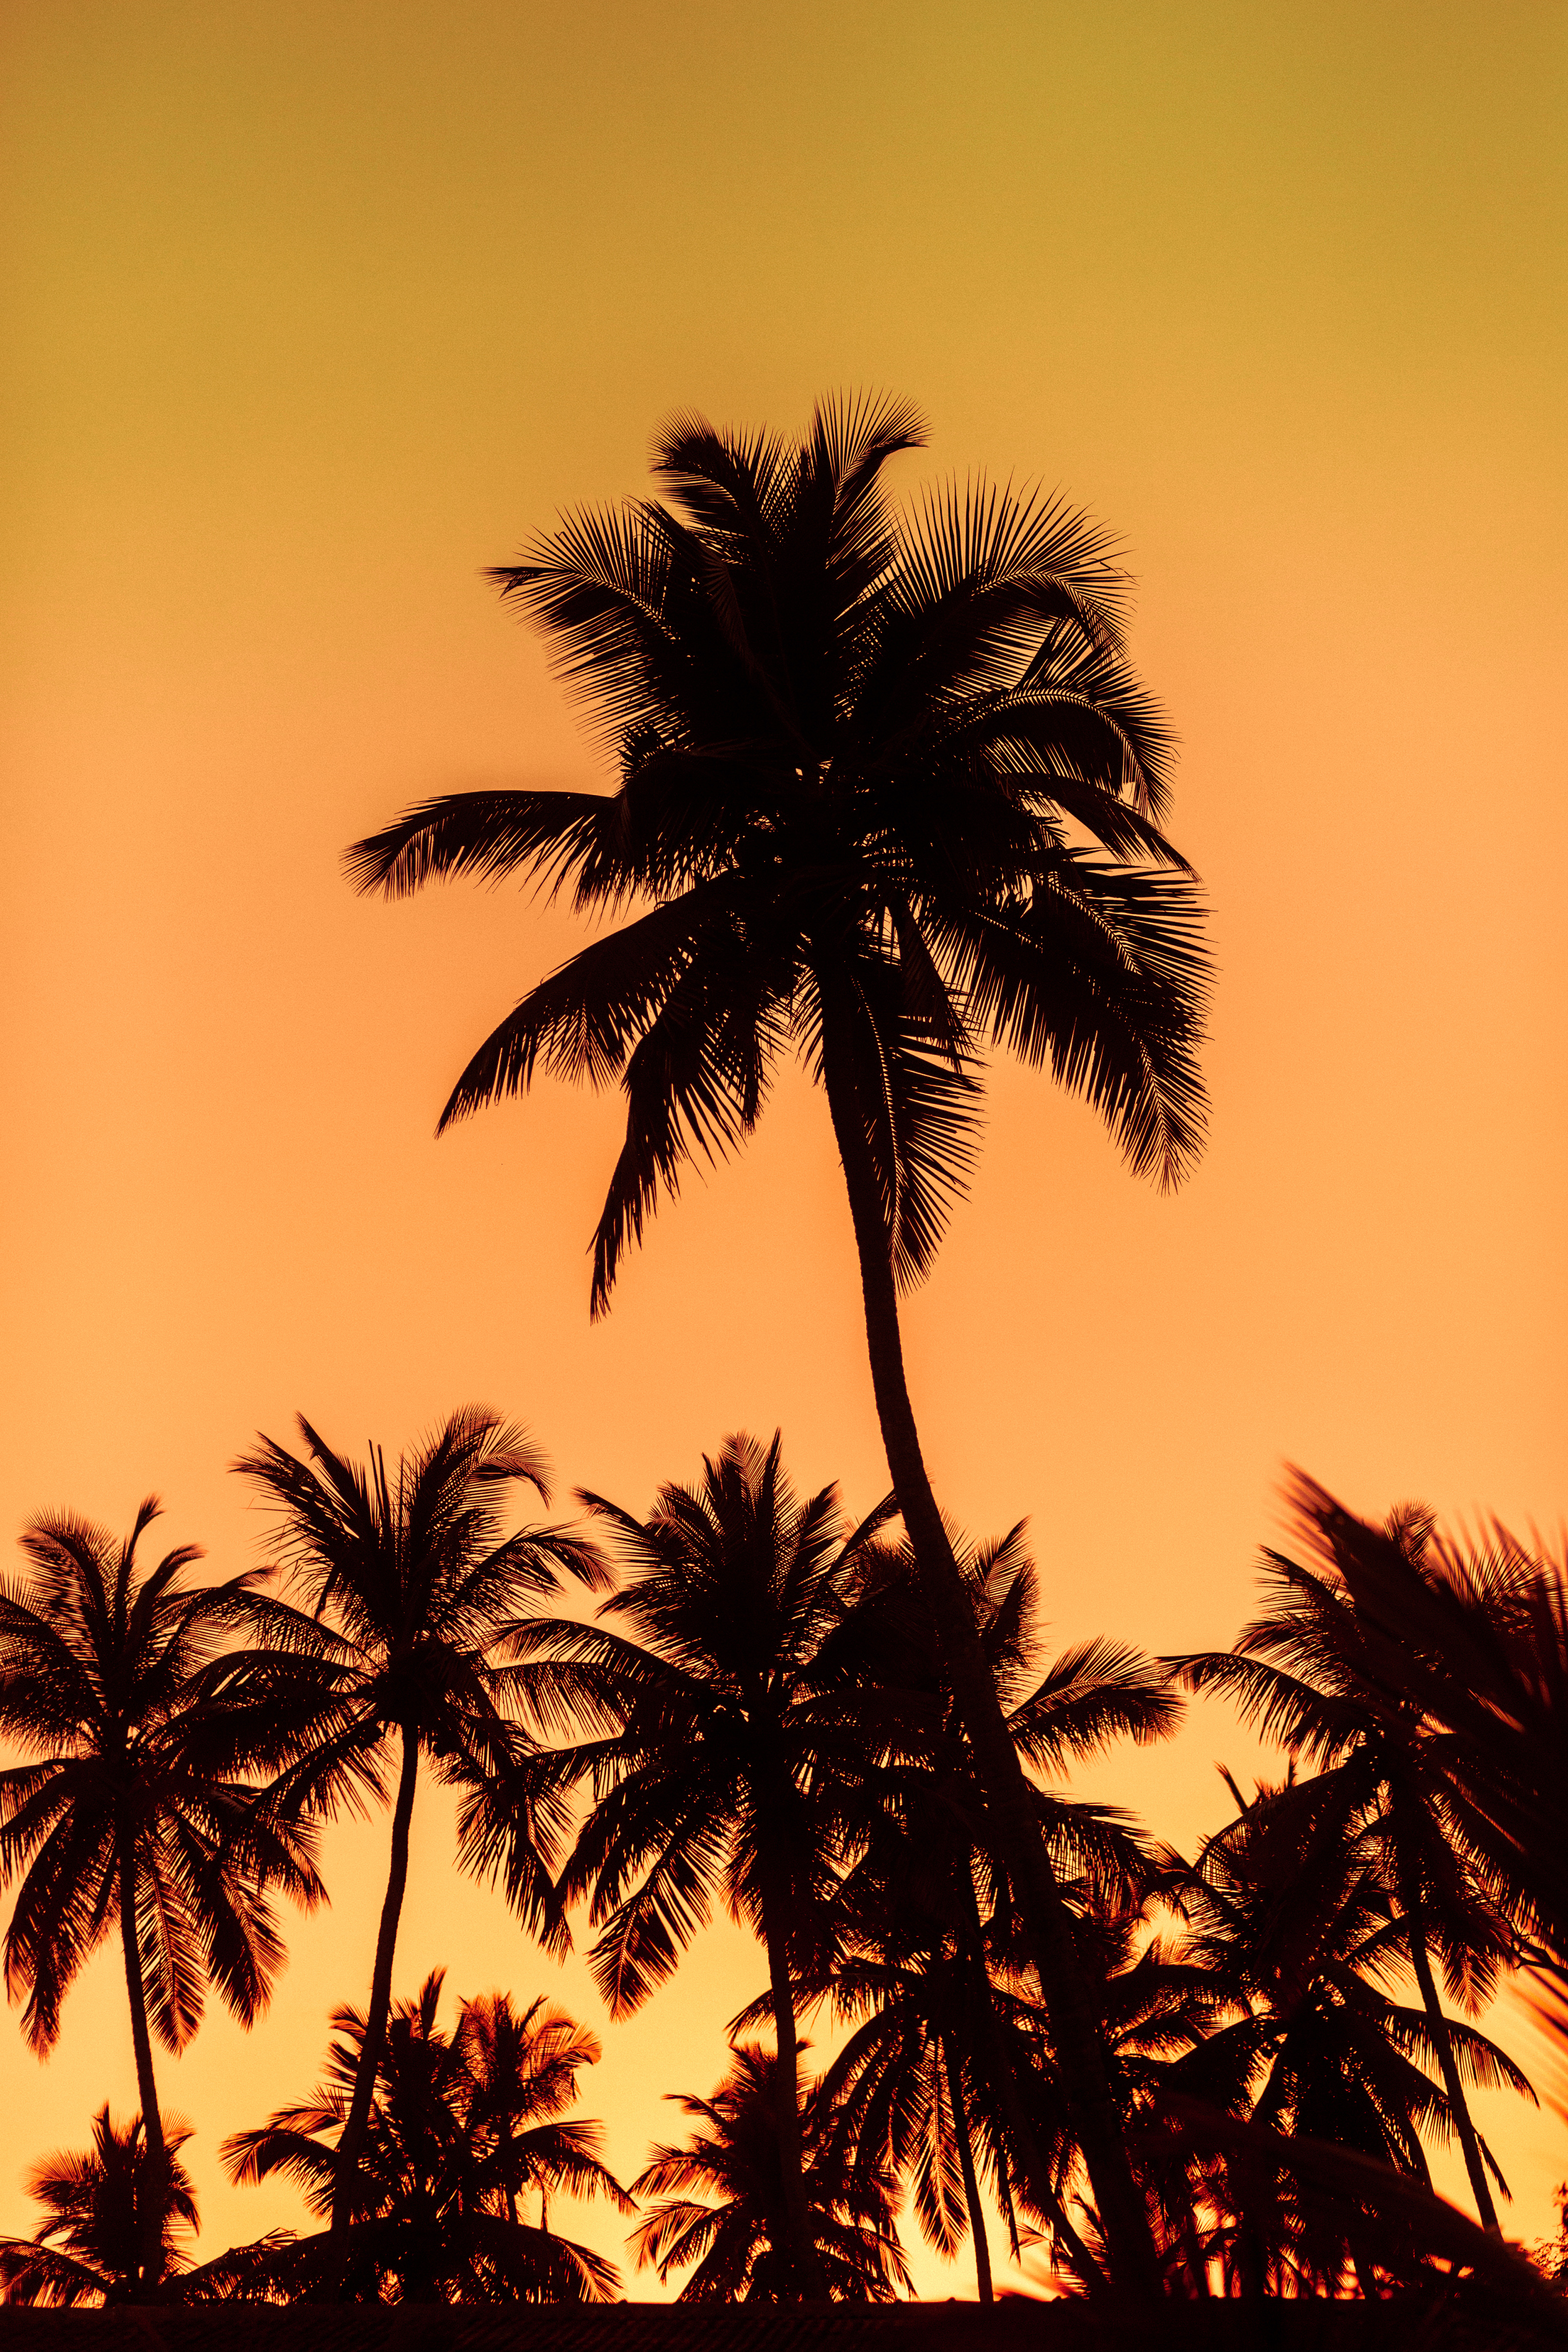 palms, nature, trees, sunset, leaves, silhouettes Image for desktop